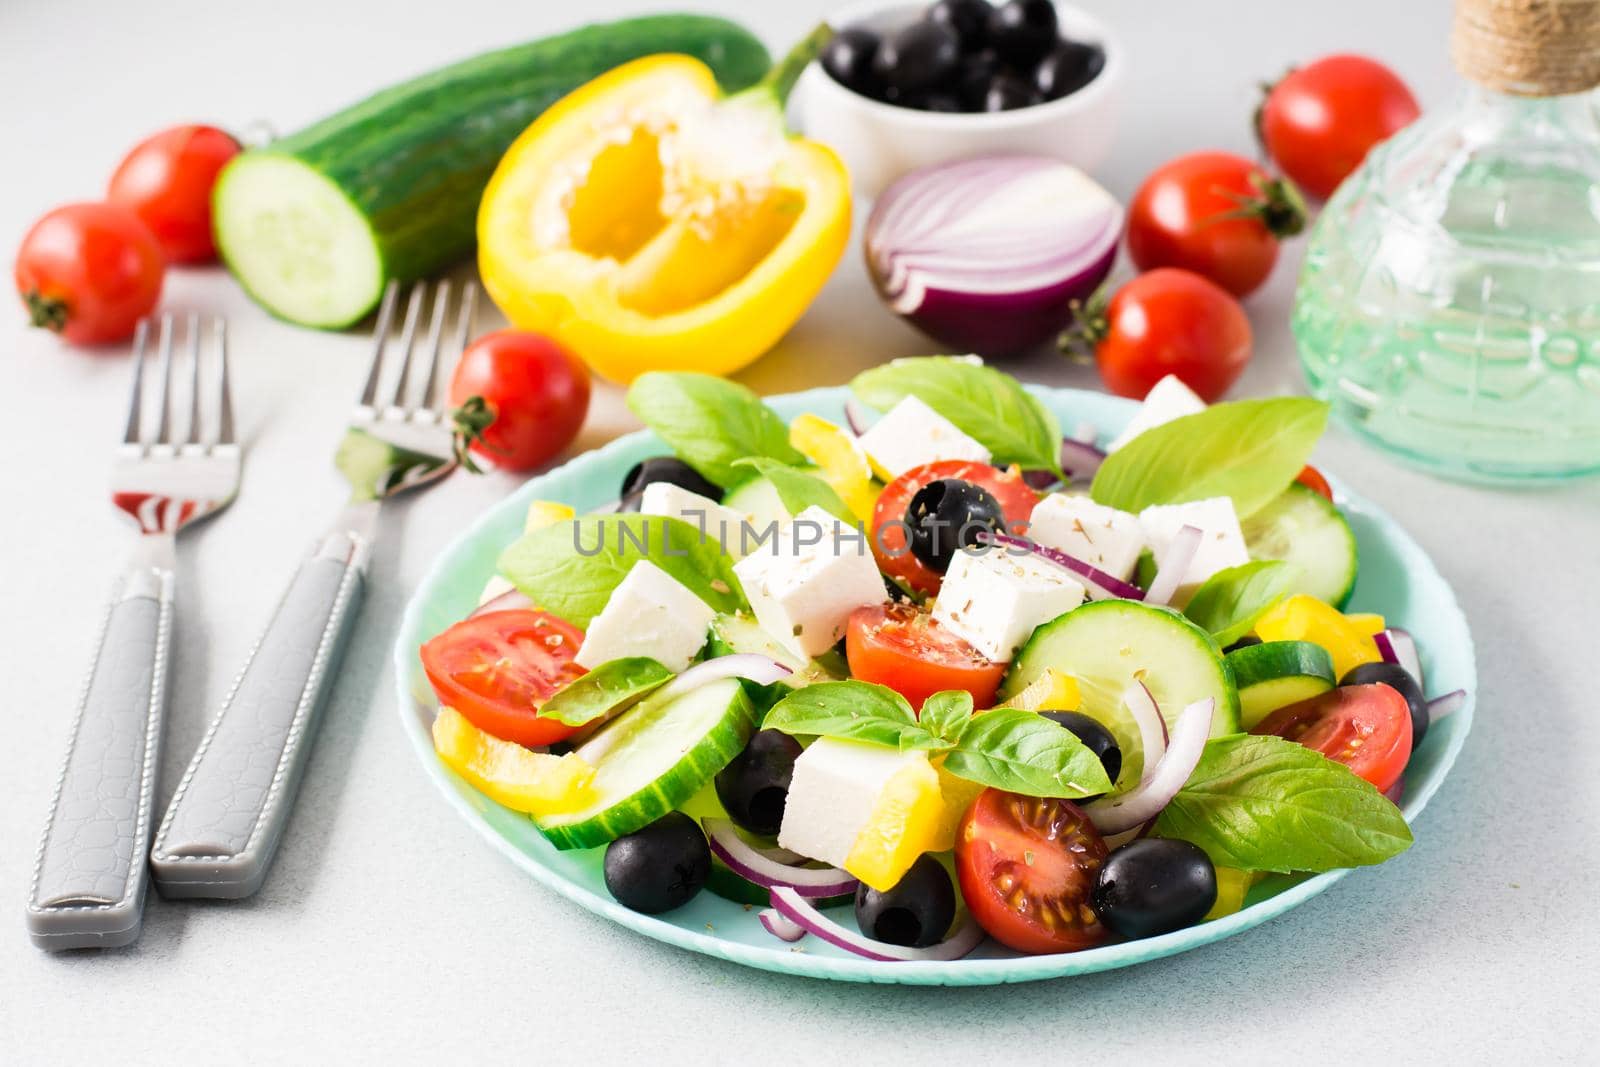 Fresh homemade greek salad with basil leaves on a plate and ingredients for cooking on the table. Domestic life by Aleruana